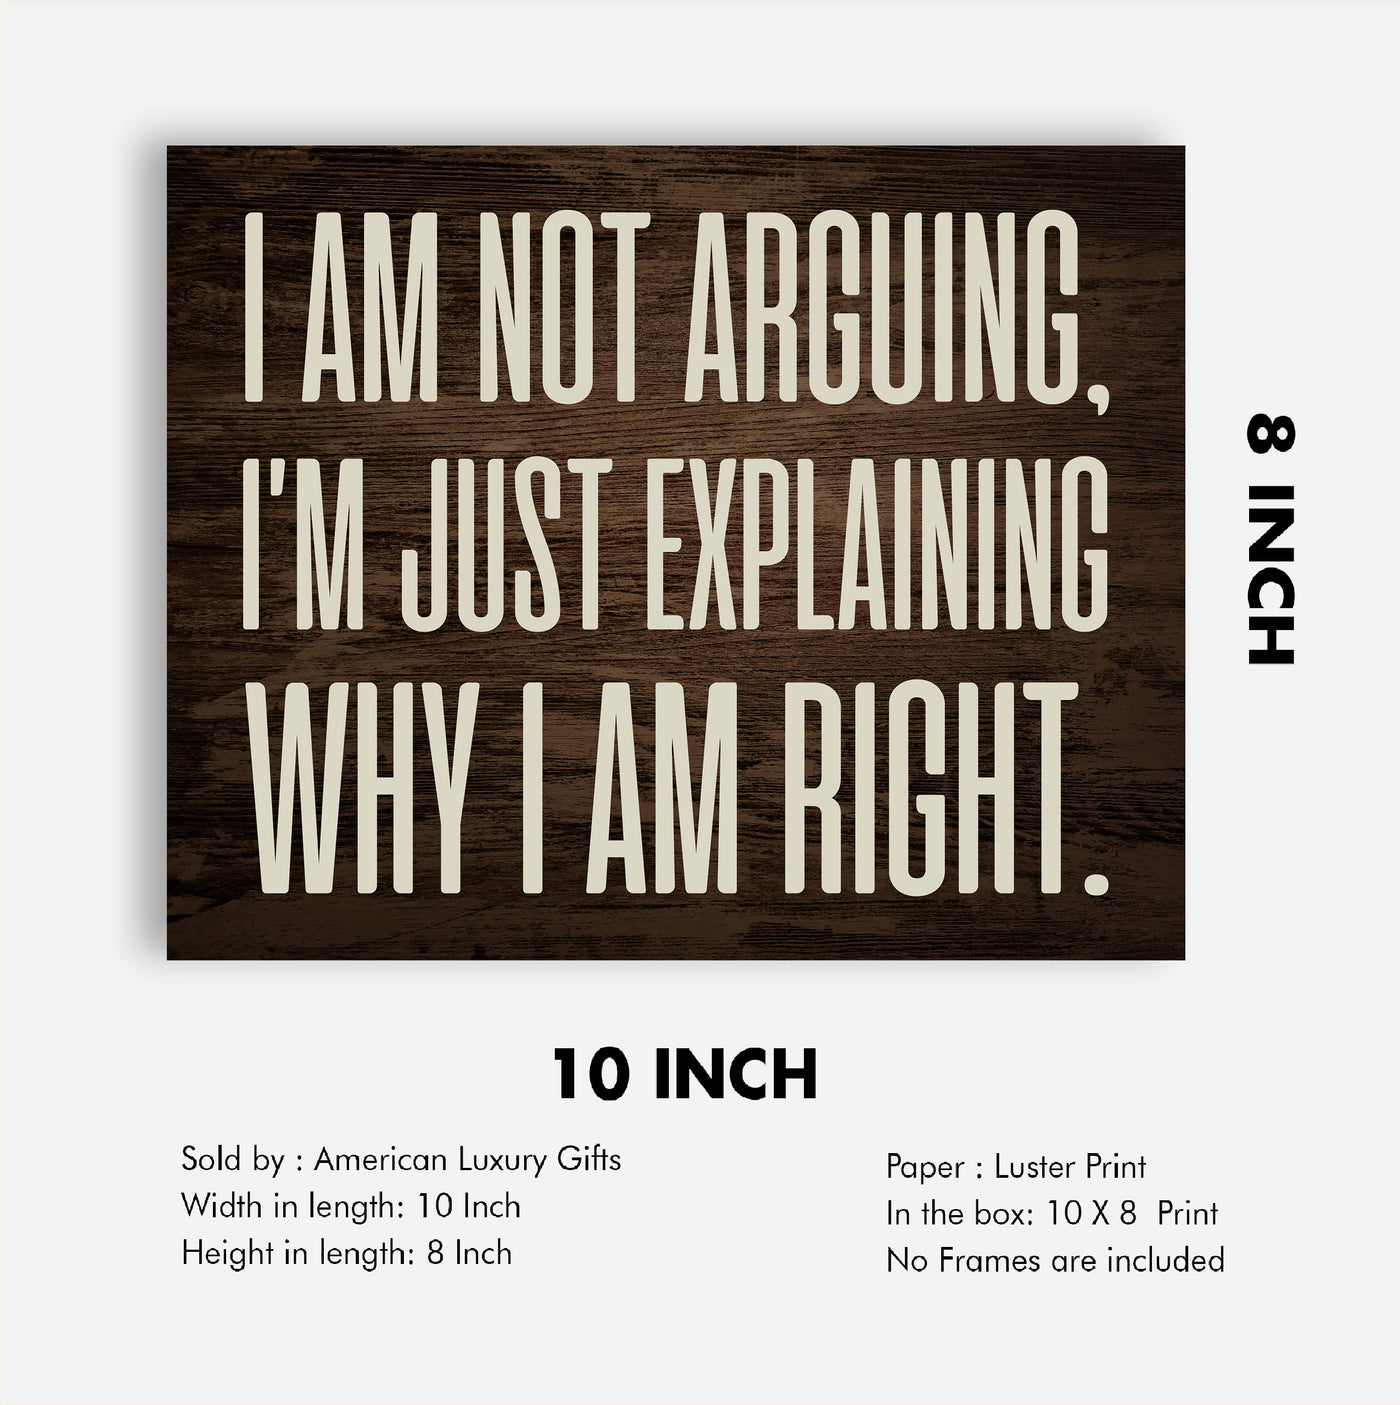 Not Arguing- Explaining Why I'm Right Funny Rustic Wall Sign -10 x 8" Modern Typography Art Print -Ready to Frame. Humorous Decor for Home-Office-Work-Cubicle-Man Cave Decor. Fun Gift for Friends!